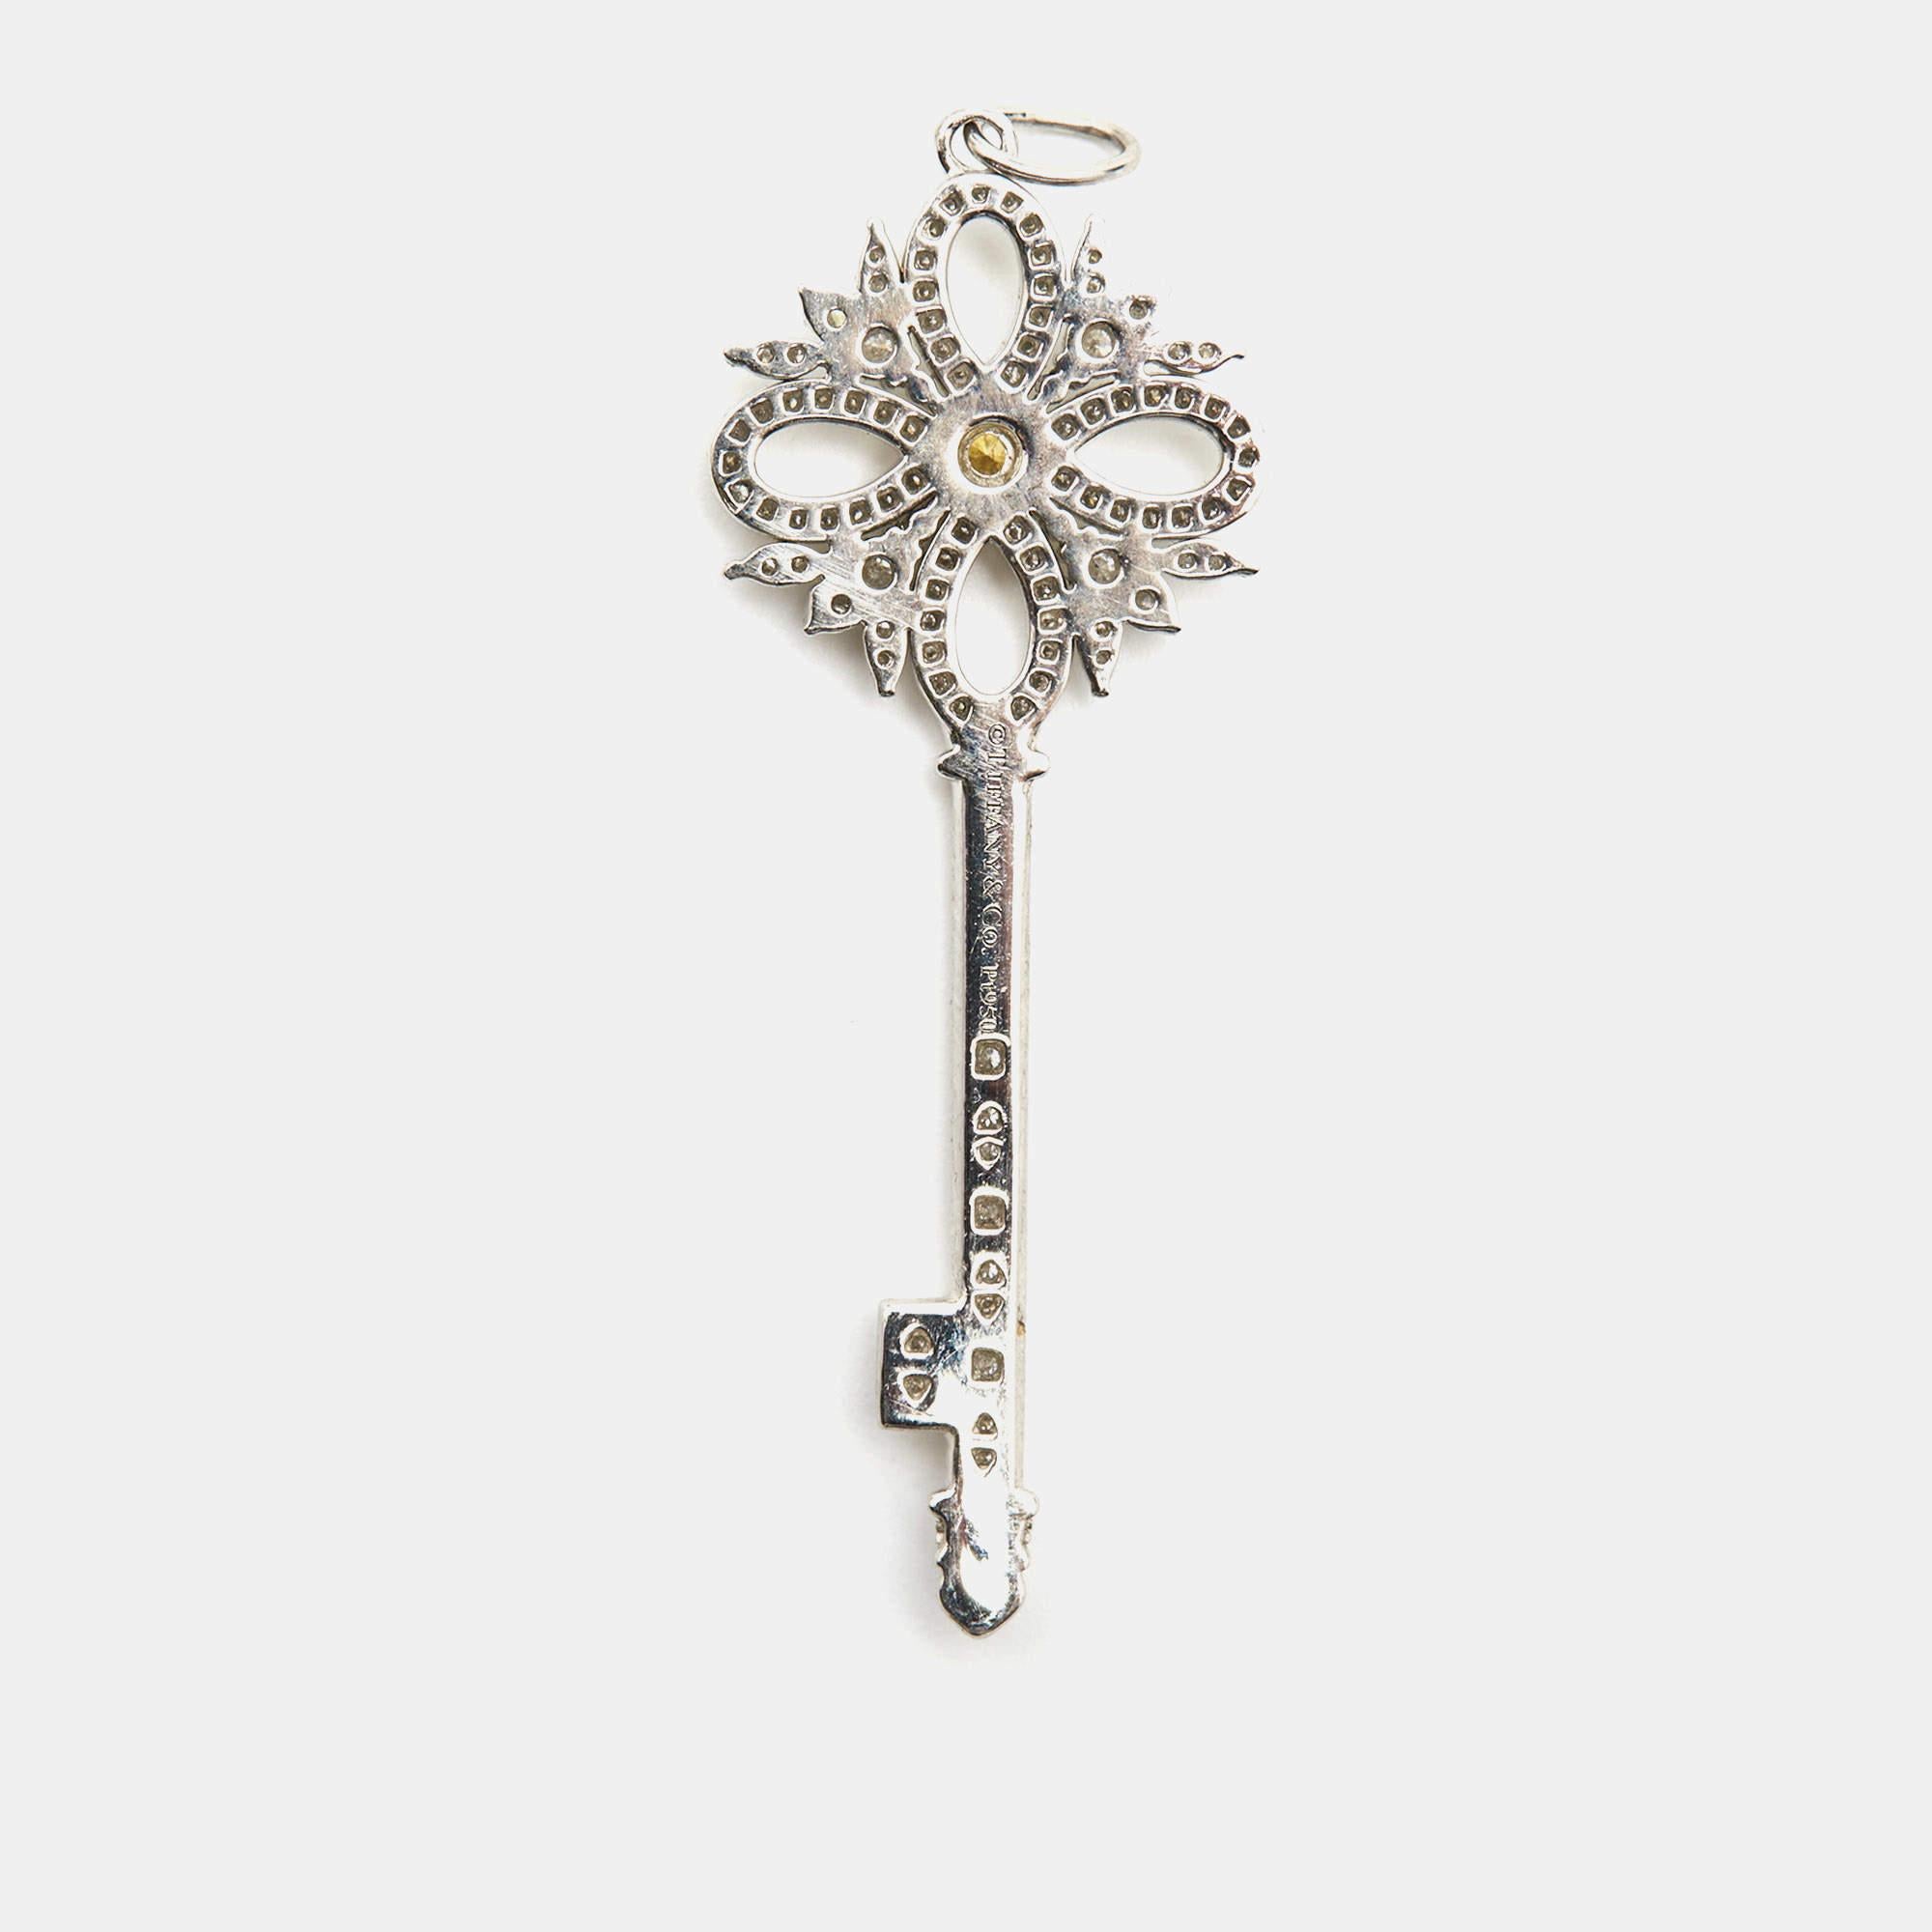 One look at this beauty from Tiffany & Co., and you'll know why diamonds are a girl's best friend. Tiffany & Co. carries the reputation of excellent craftsmanship and exquisite creativity when it comes to jewelry, and this gorgeous Victoria Key